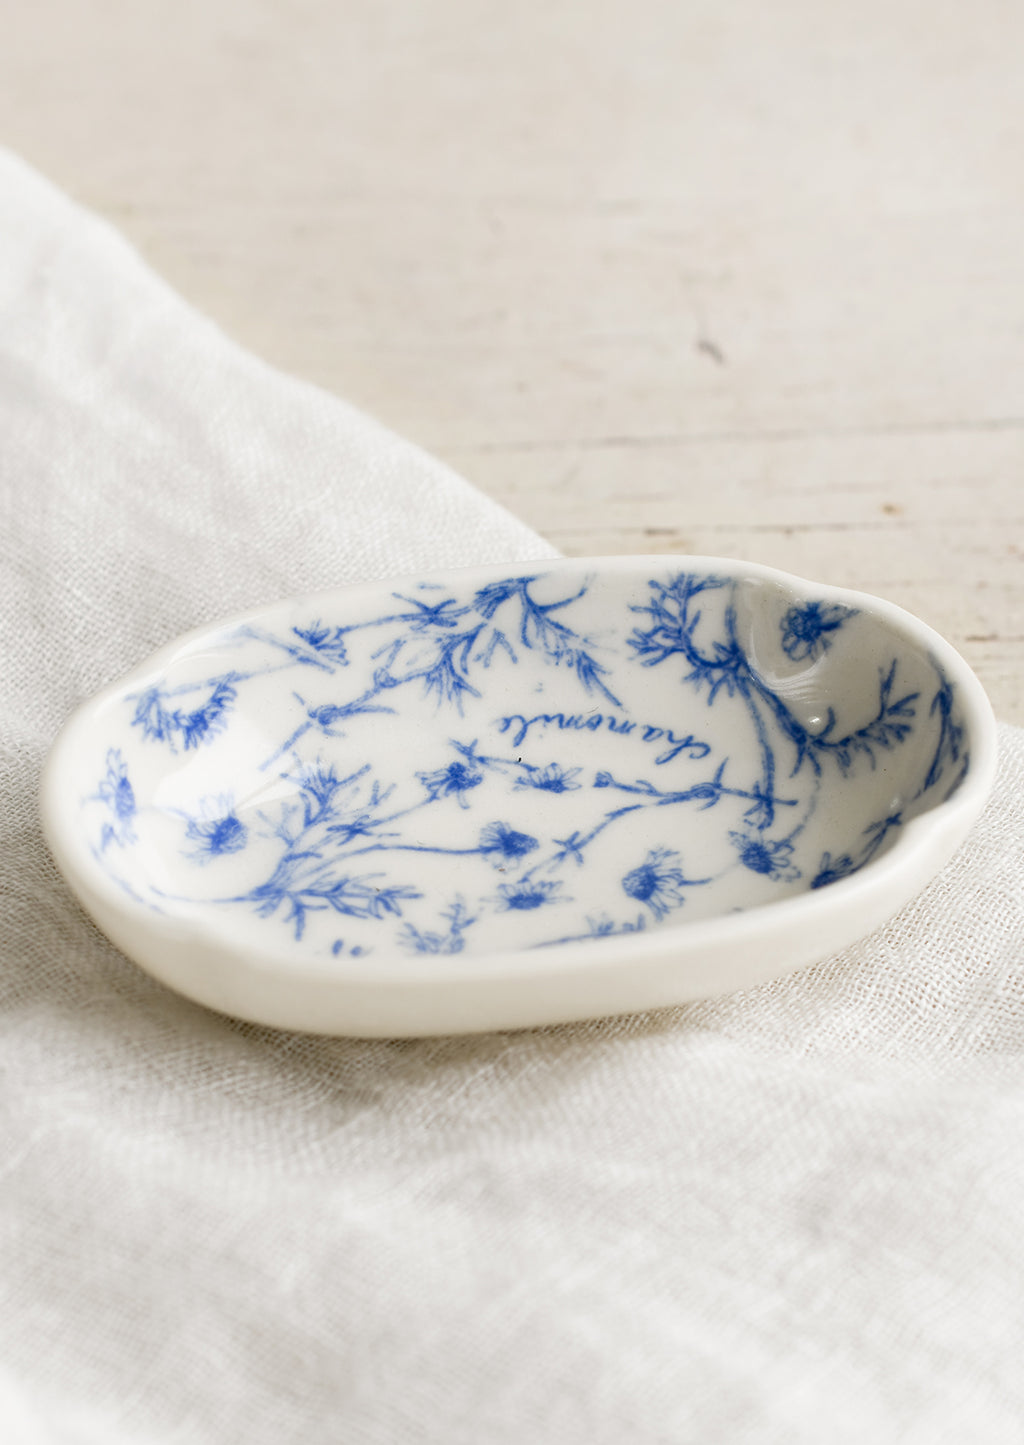 1: A small oval shaped dish in white with blue floral pattern.